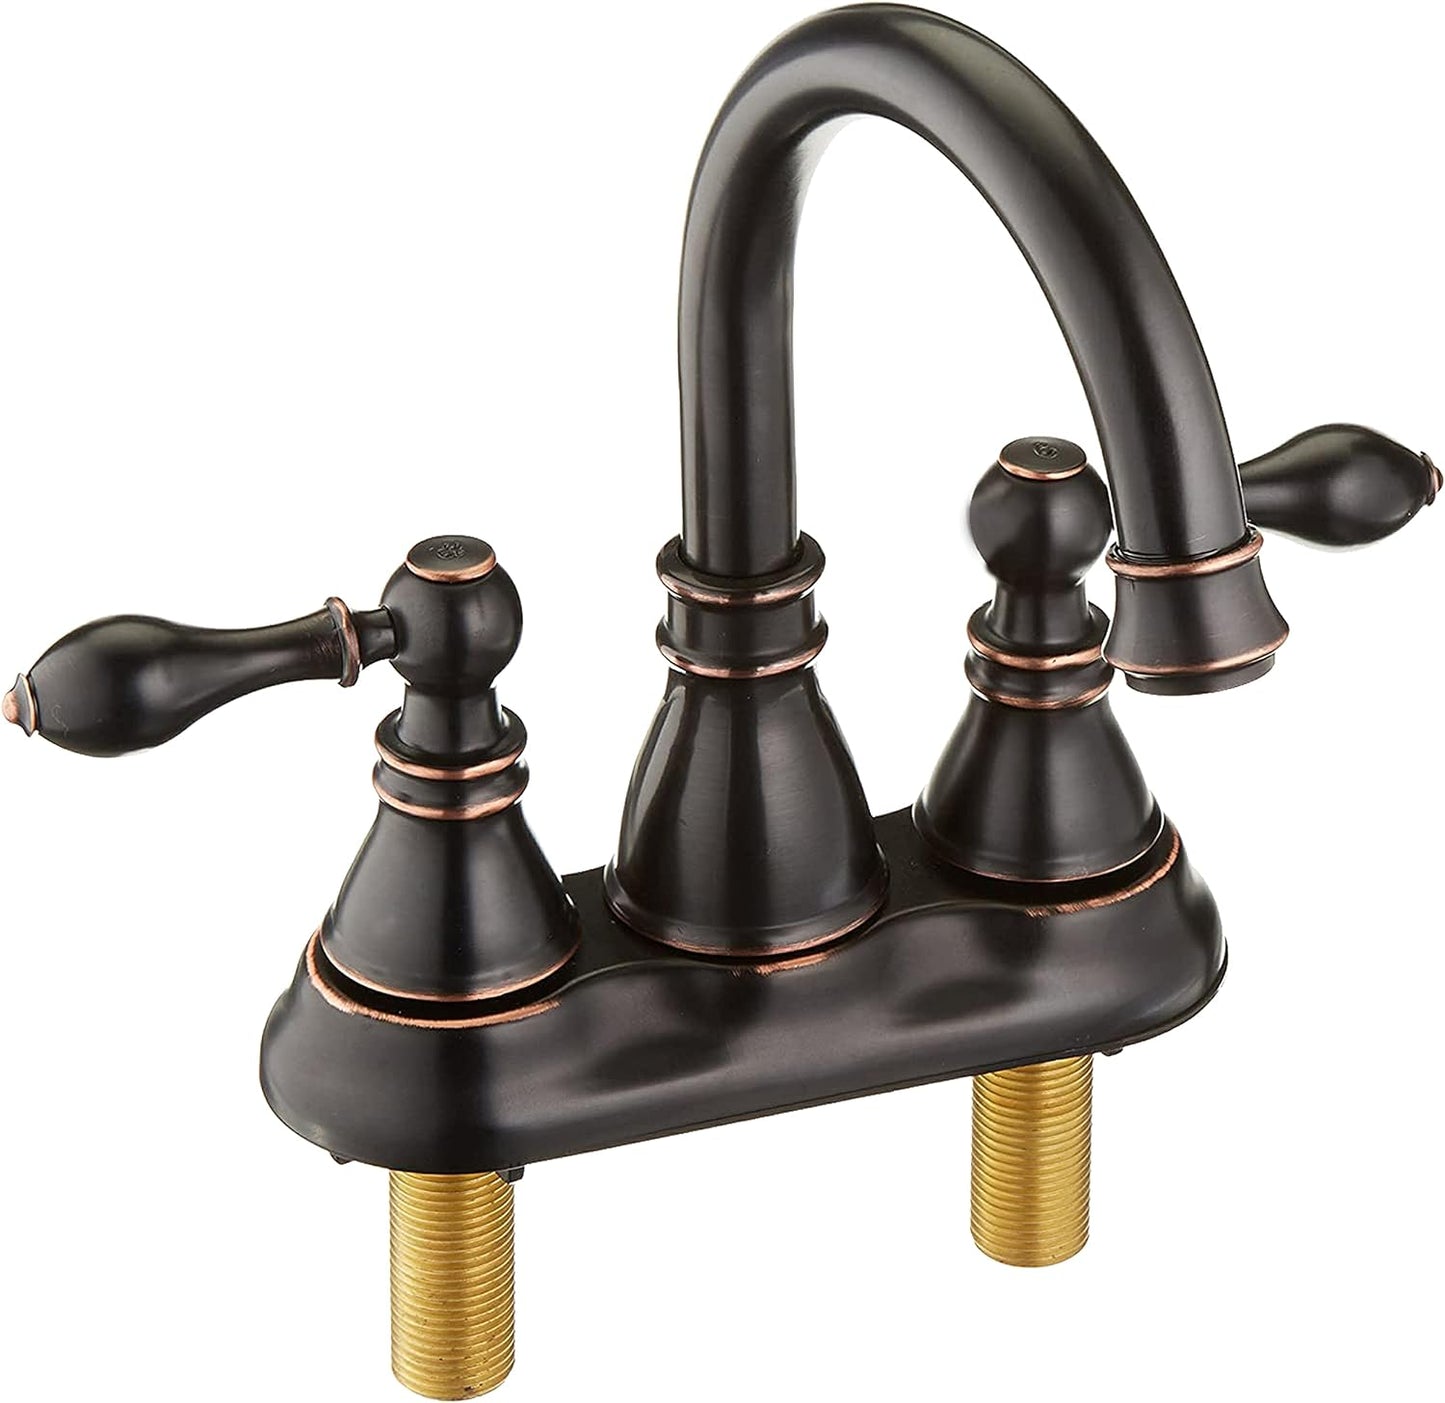 Derengge 2 Handle Oil Rubbed Bronze Bathroom Sink Faucet with Pop up Drain,